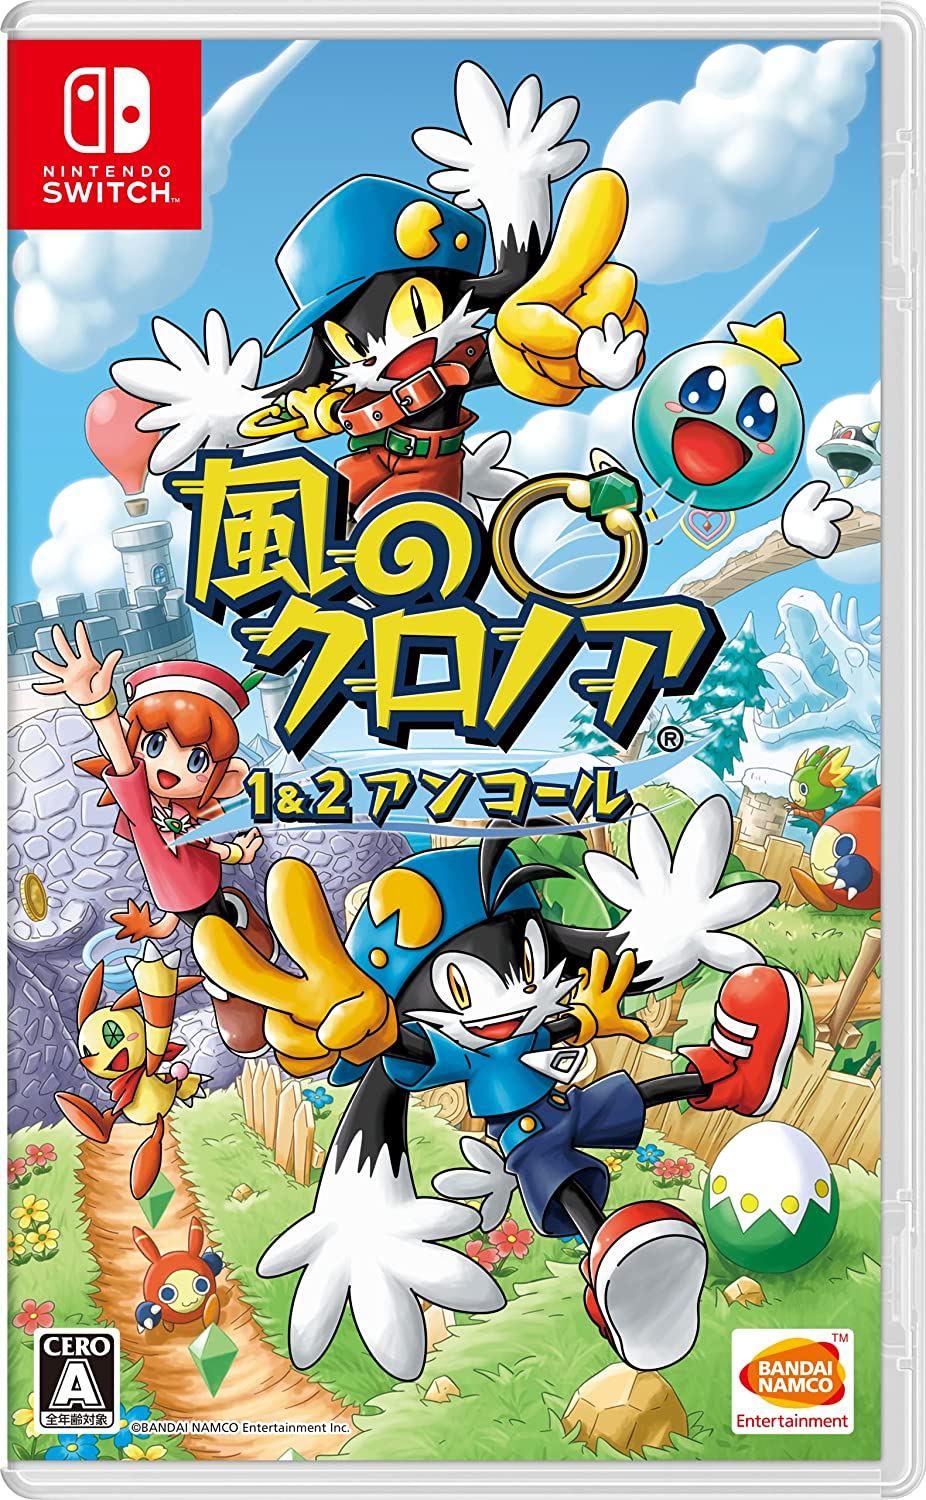 download klonoa phantasy reverie series switch for free